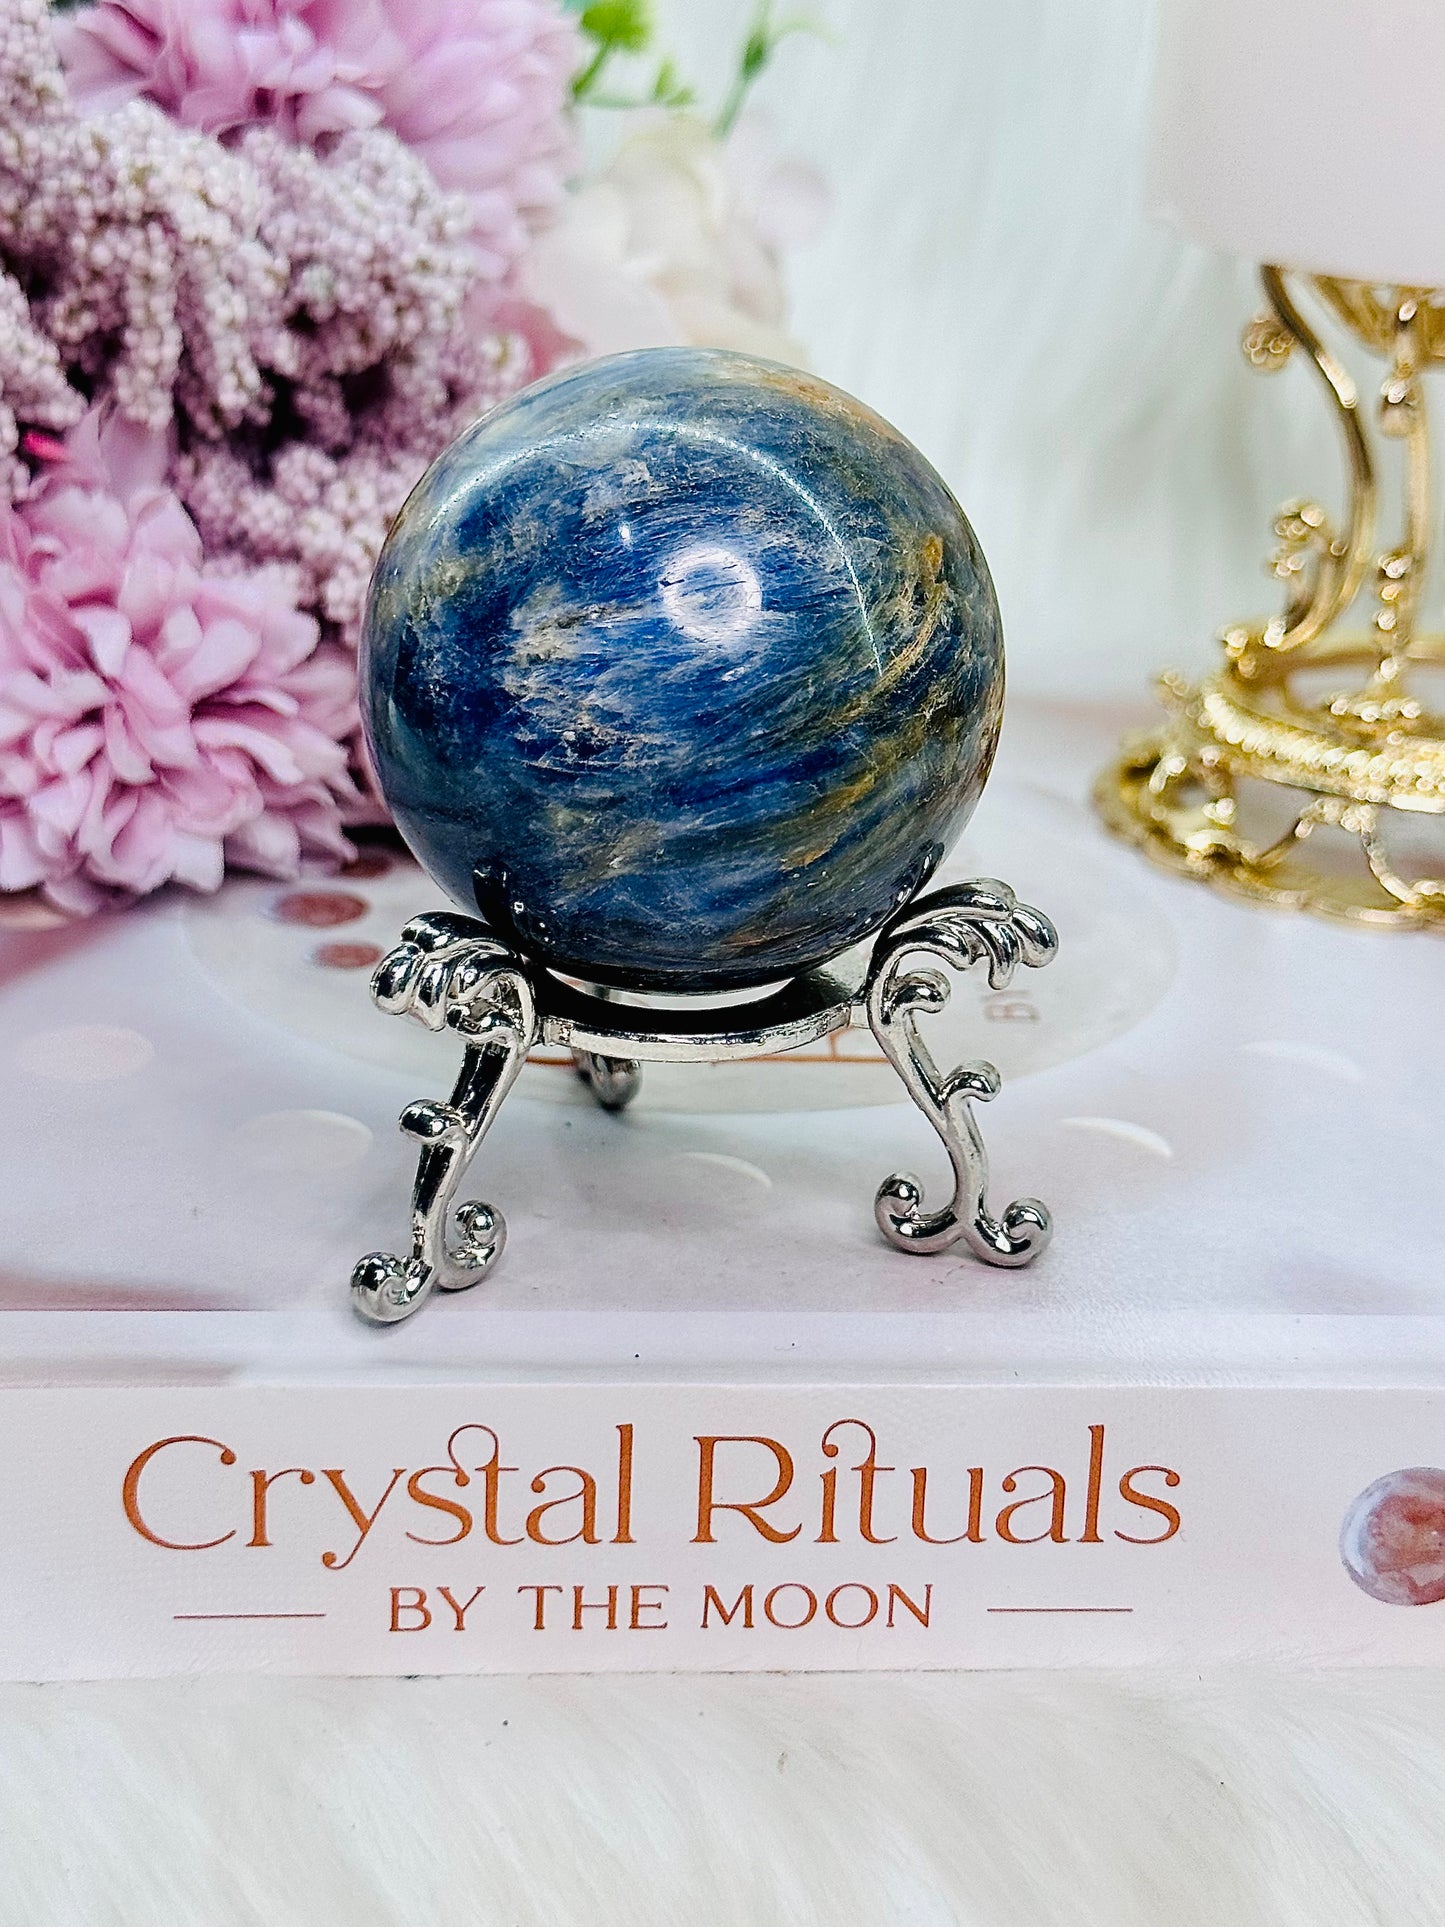 Brings Tranquility ~ Lovely Blue Kyanite Sphere on Stand 223grams